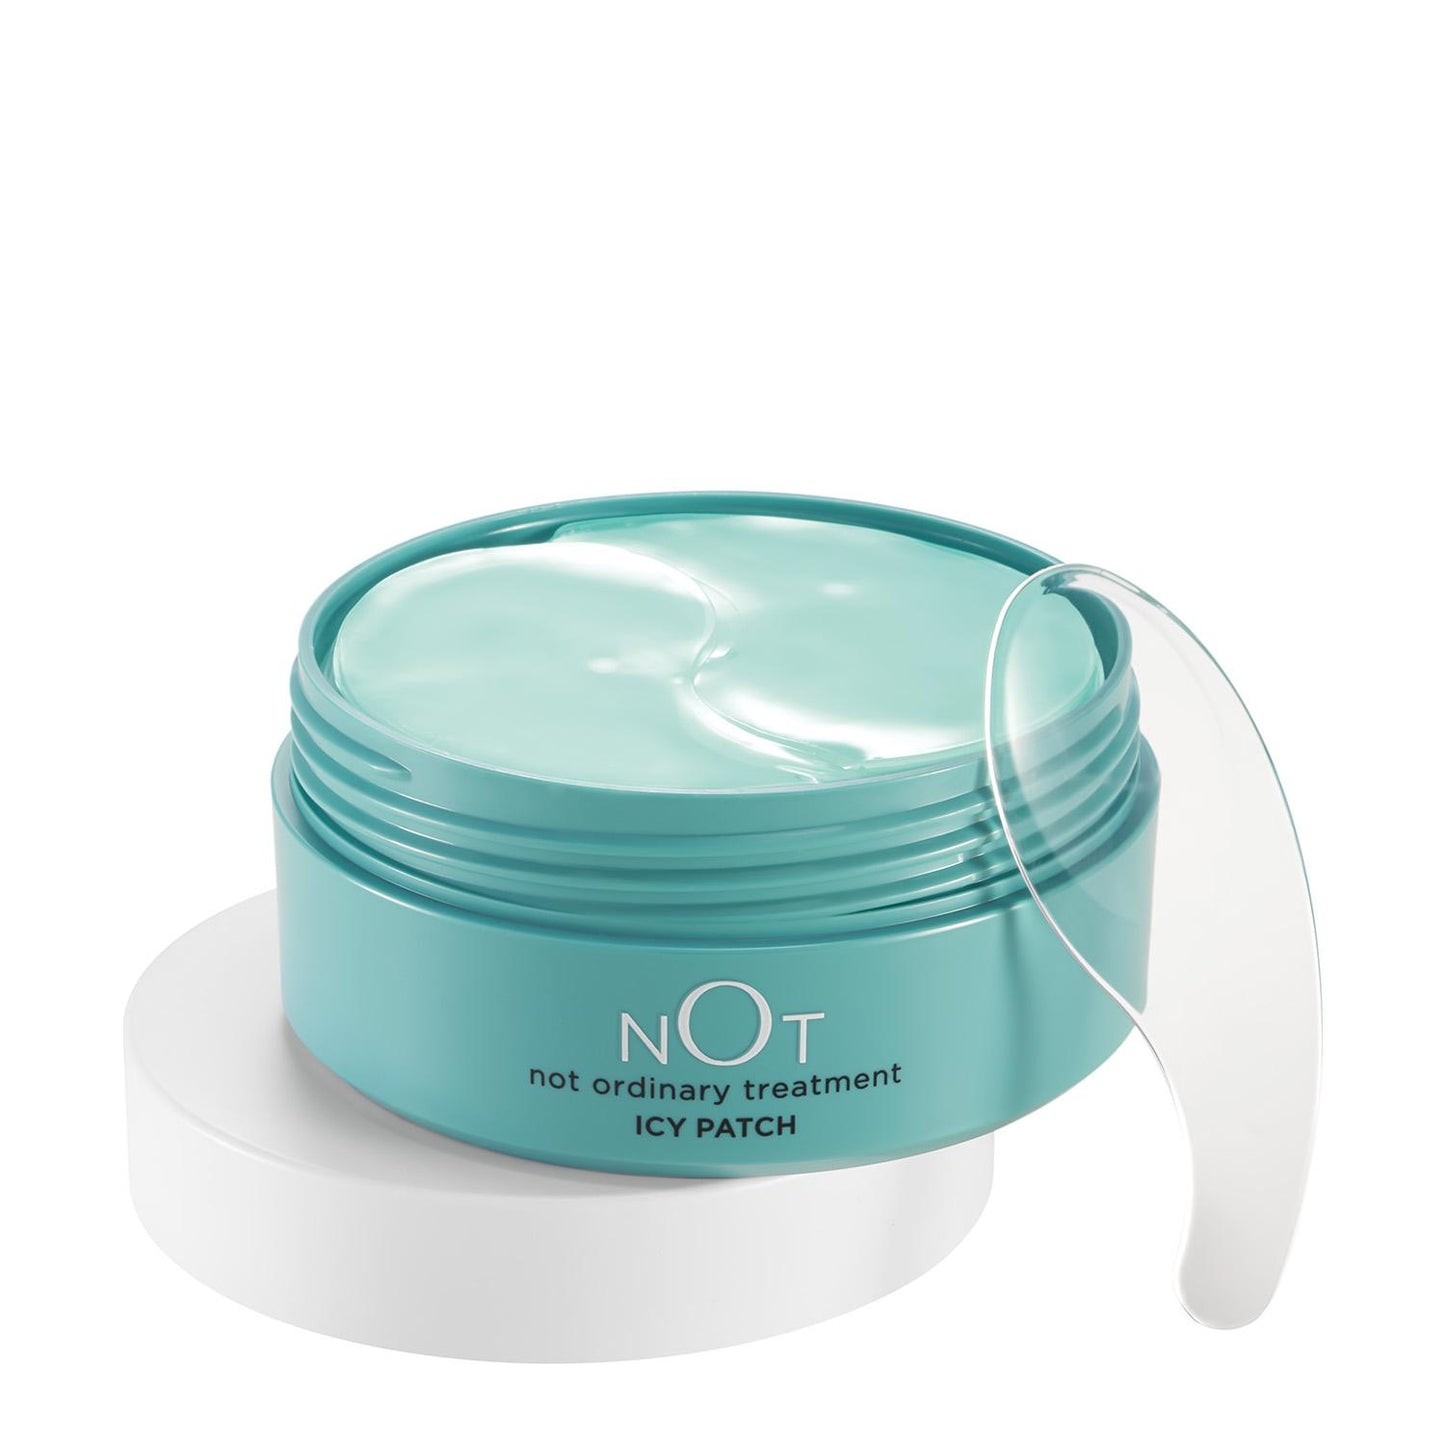 NOT Icy Patch Anti-stress e anti-ageing